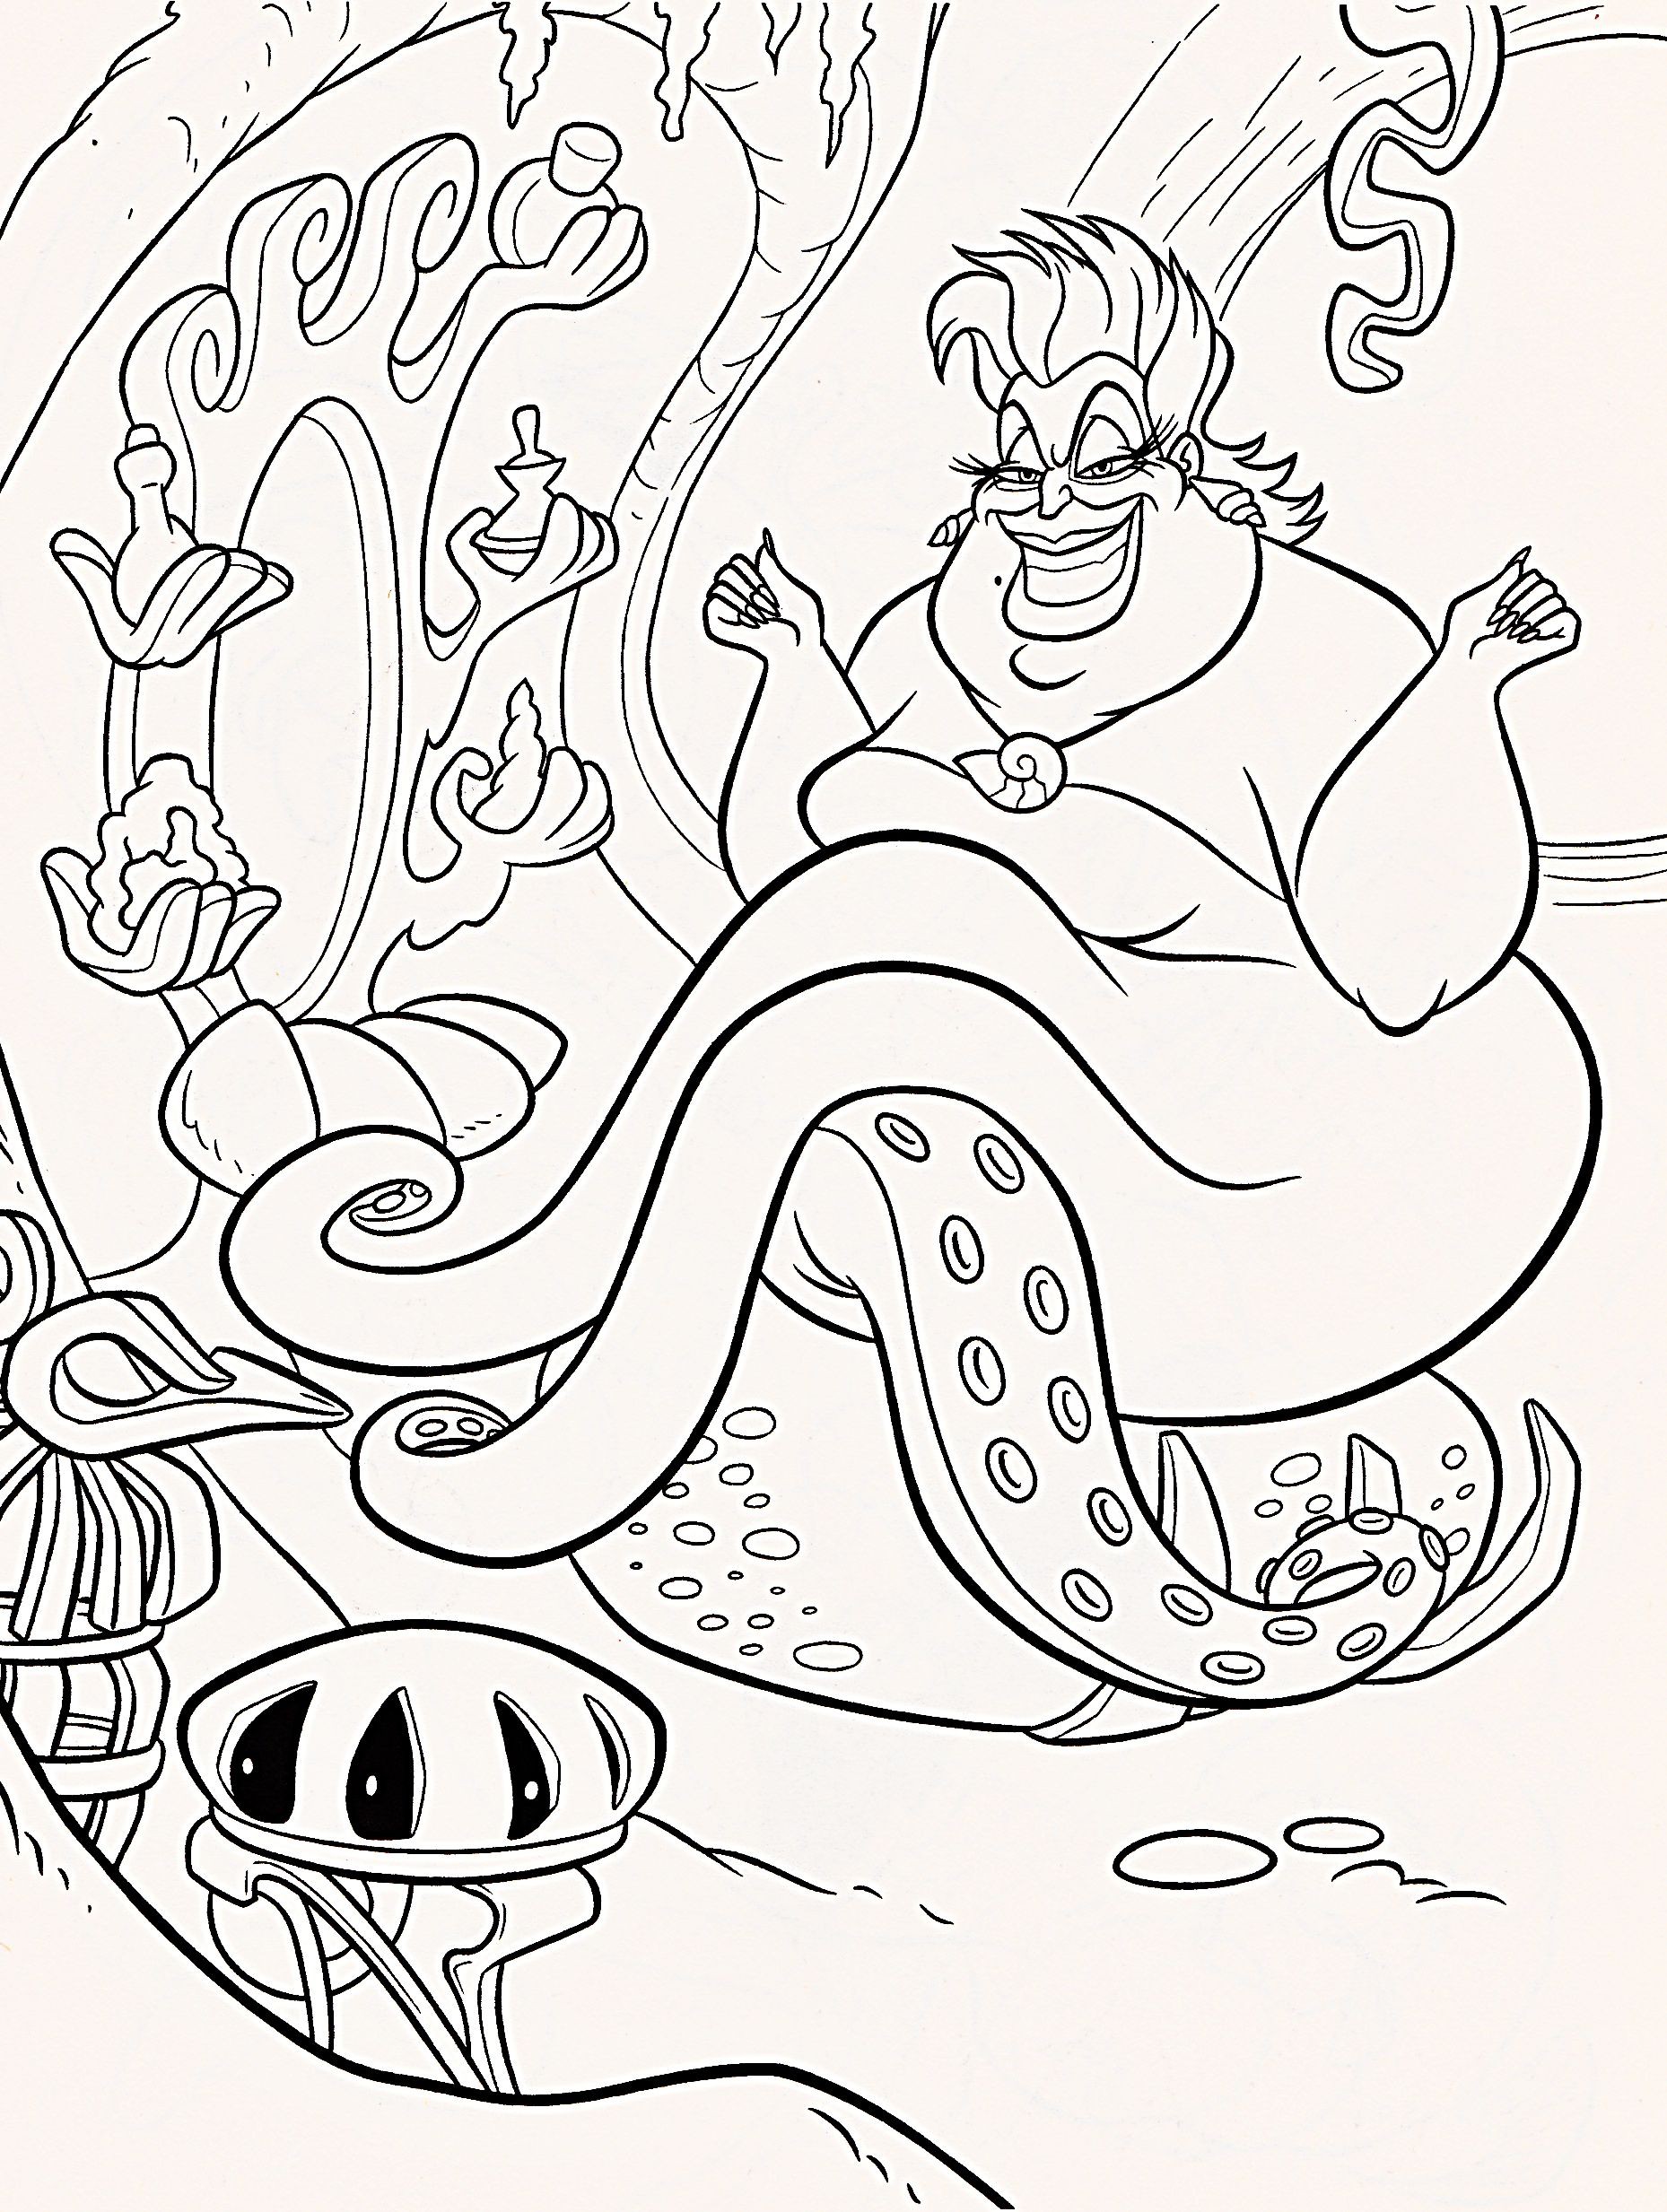 Princess Colouring Pages for Adults